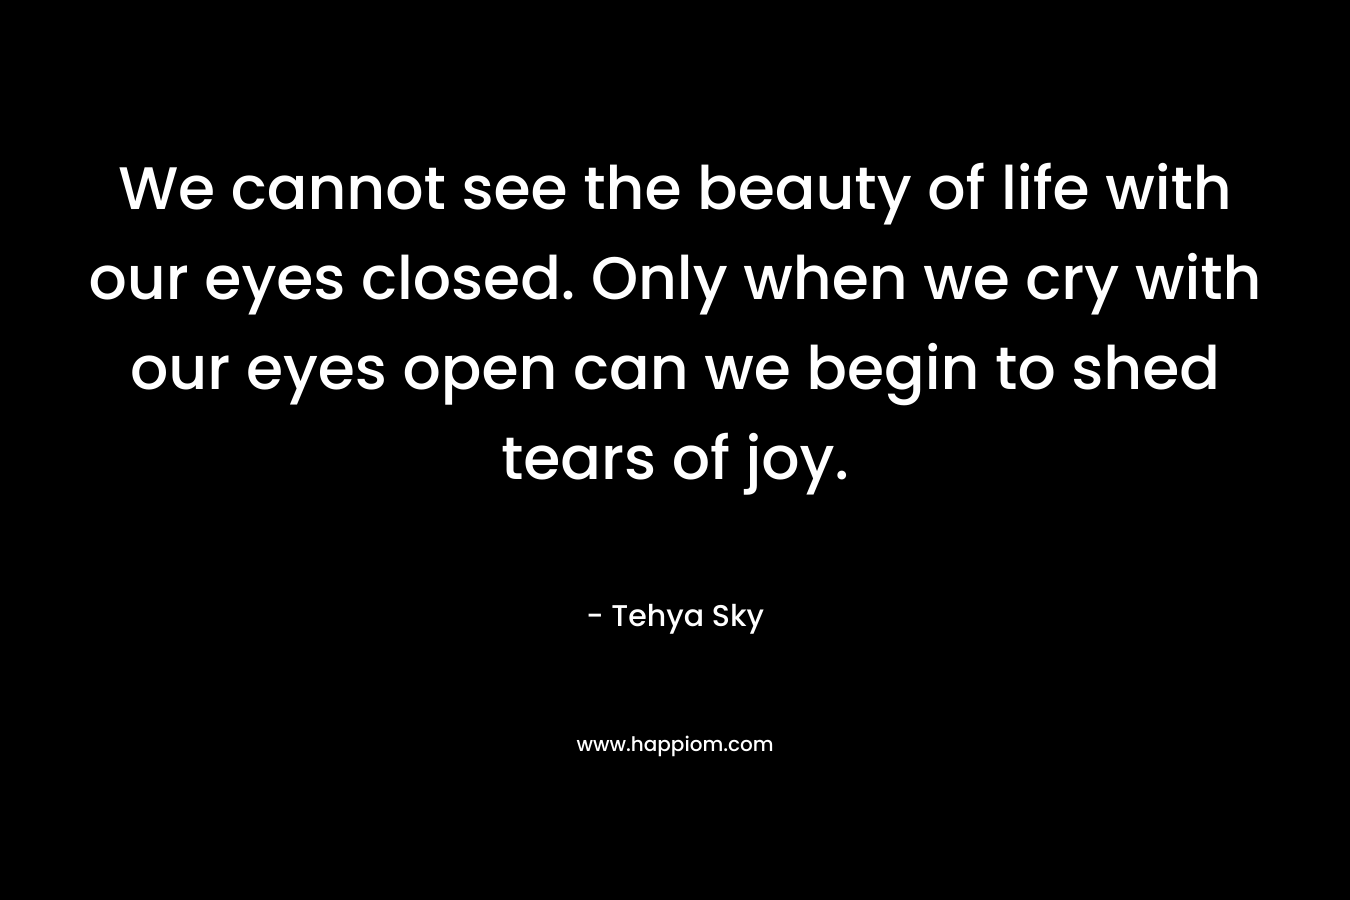 We cannot see the beauty of life with our eyes closed. Only when we cry with our eyes open can we begin to shed tears of joy. – Tehya Sky